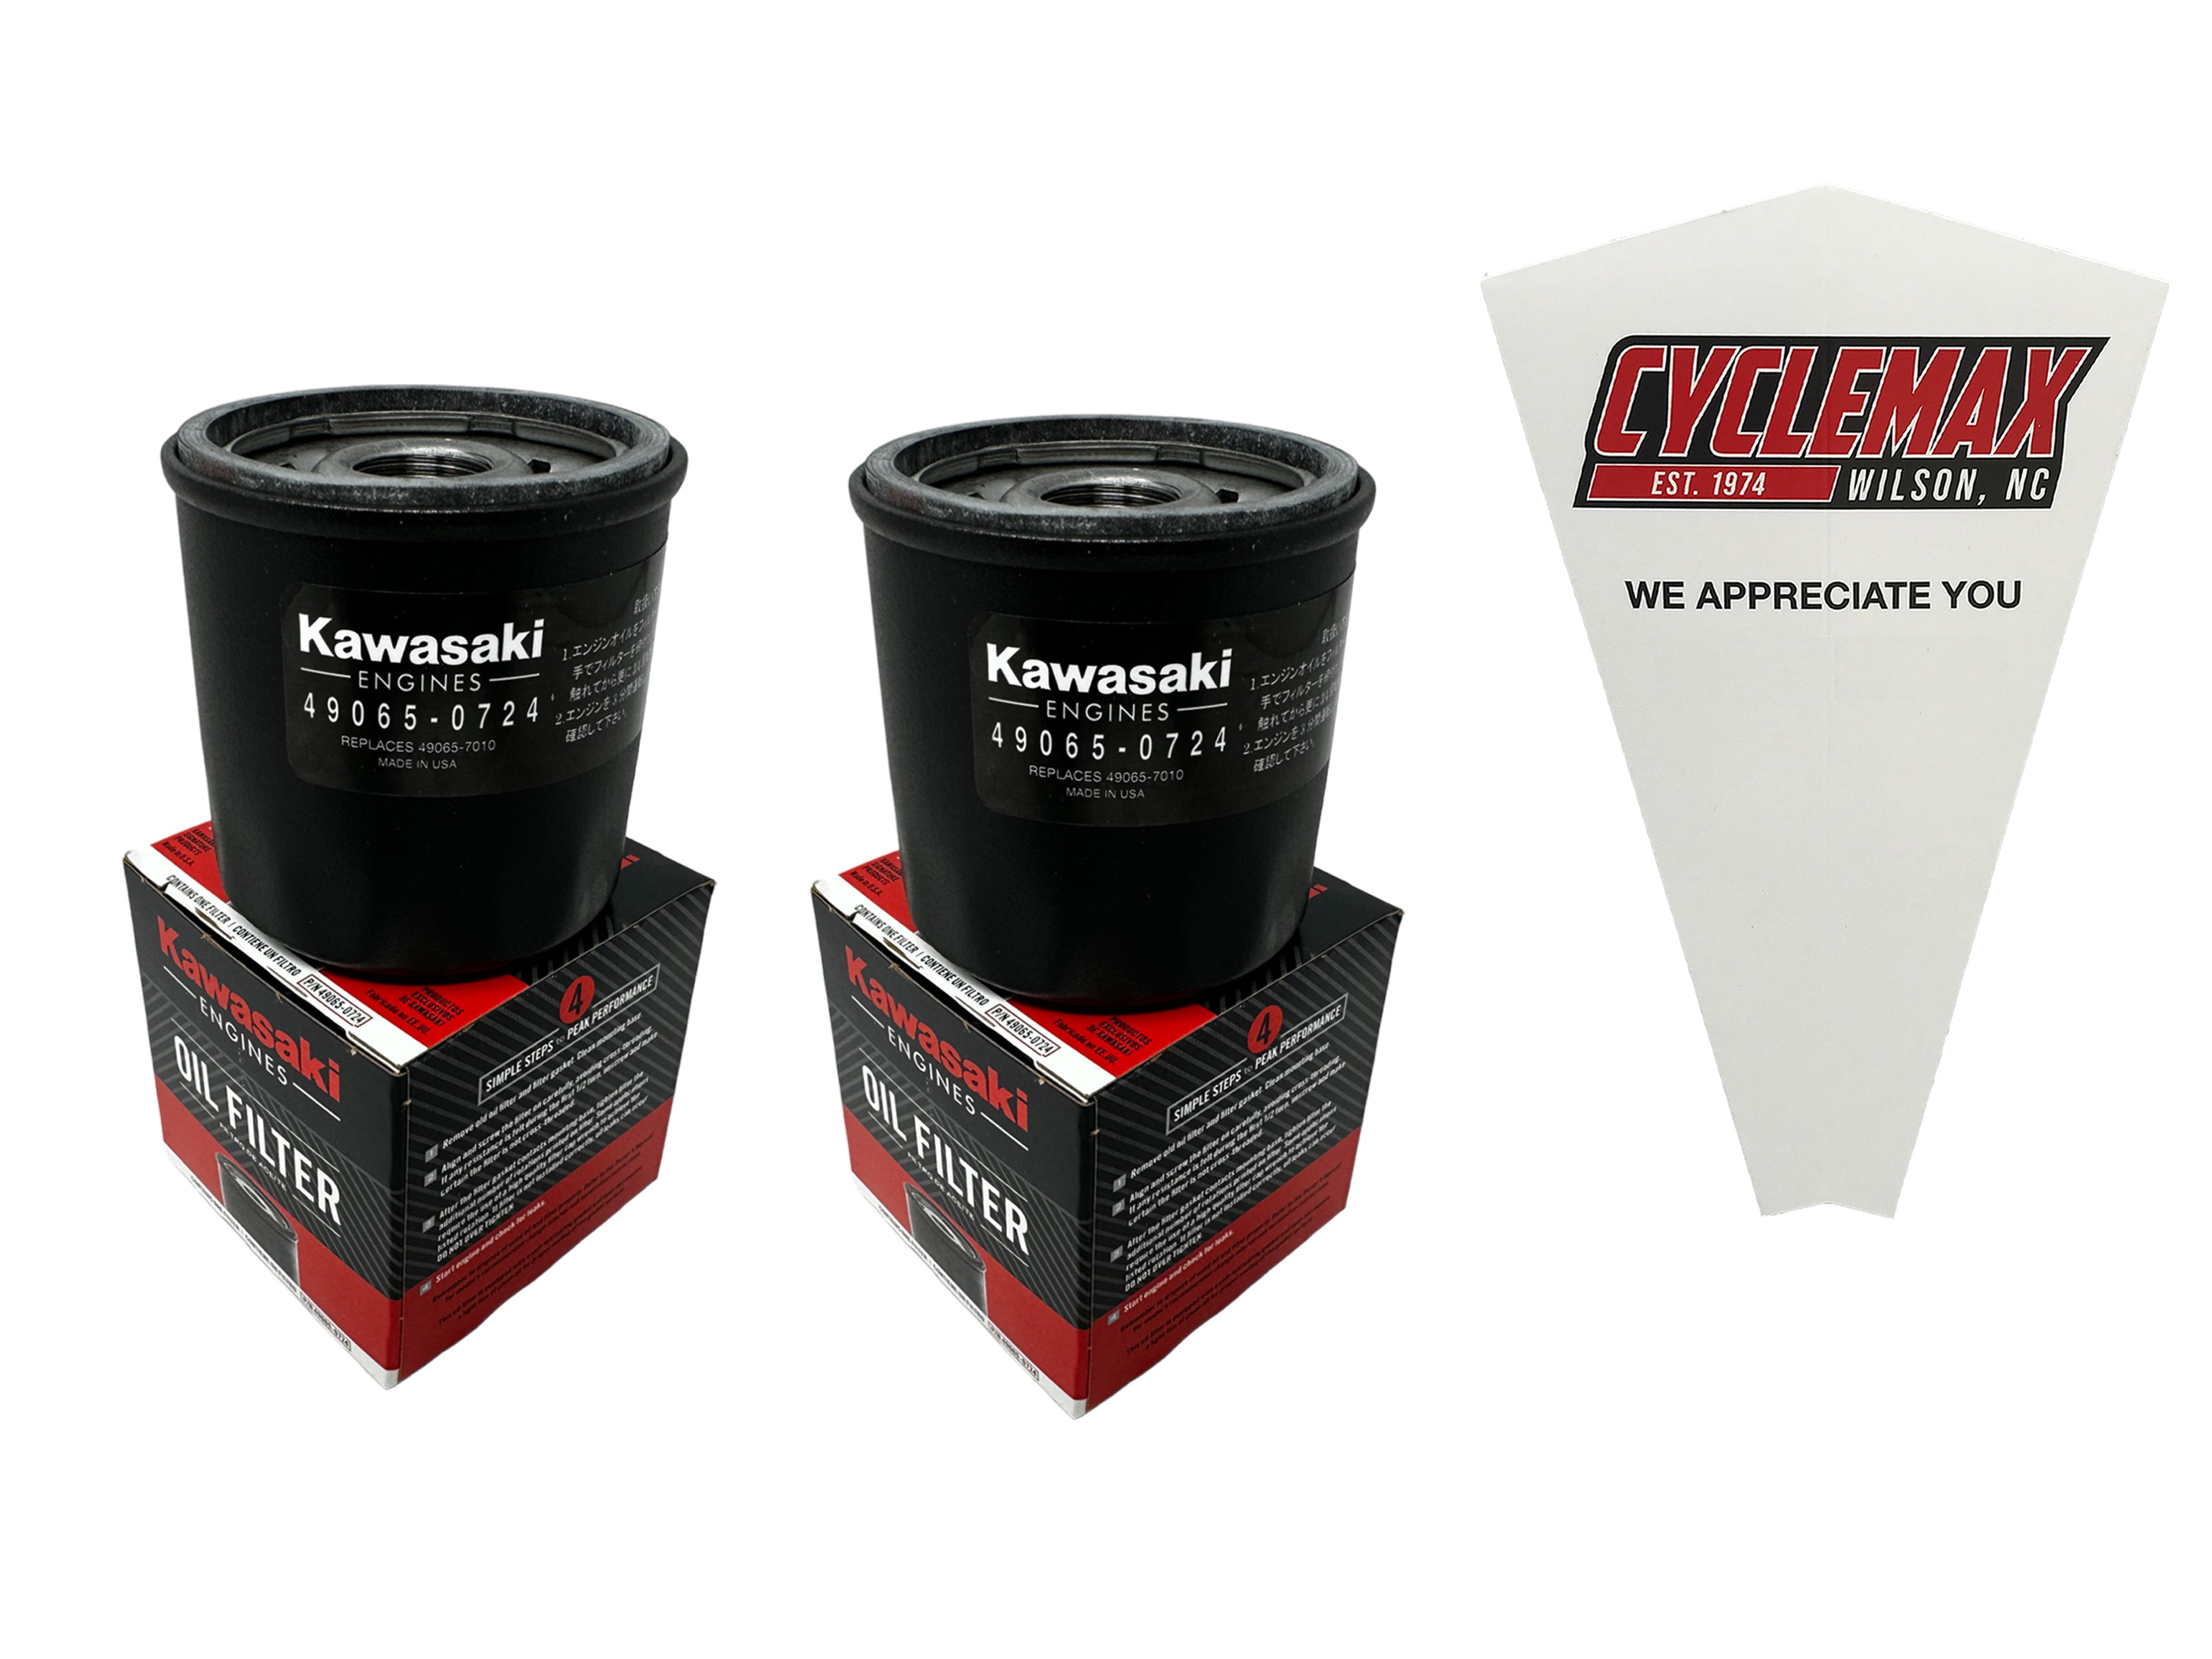 Cyclemax Two Pack for Kawasaki Oil Filter 49065-0724 Contains Two Filters and a Funnel